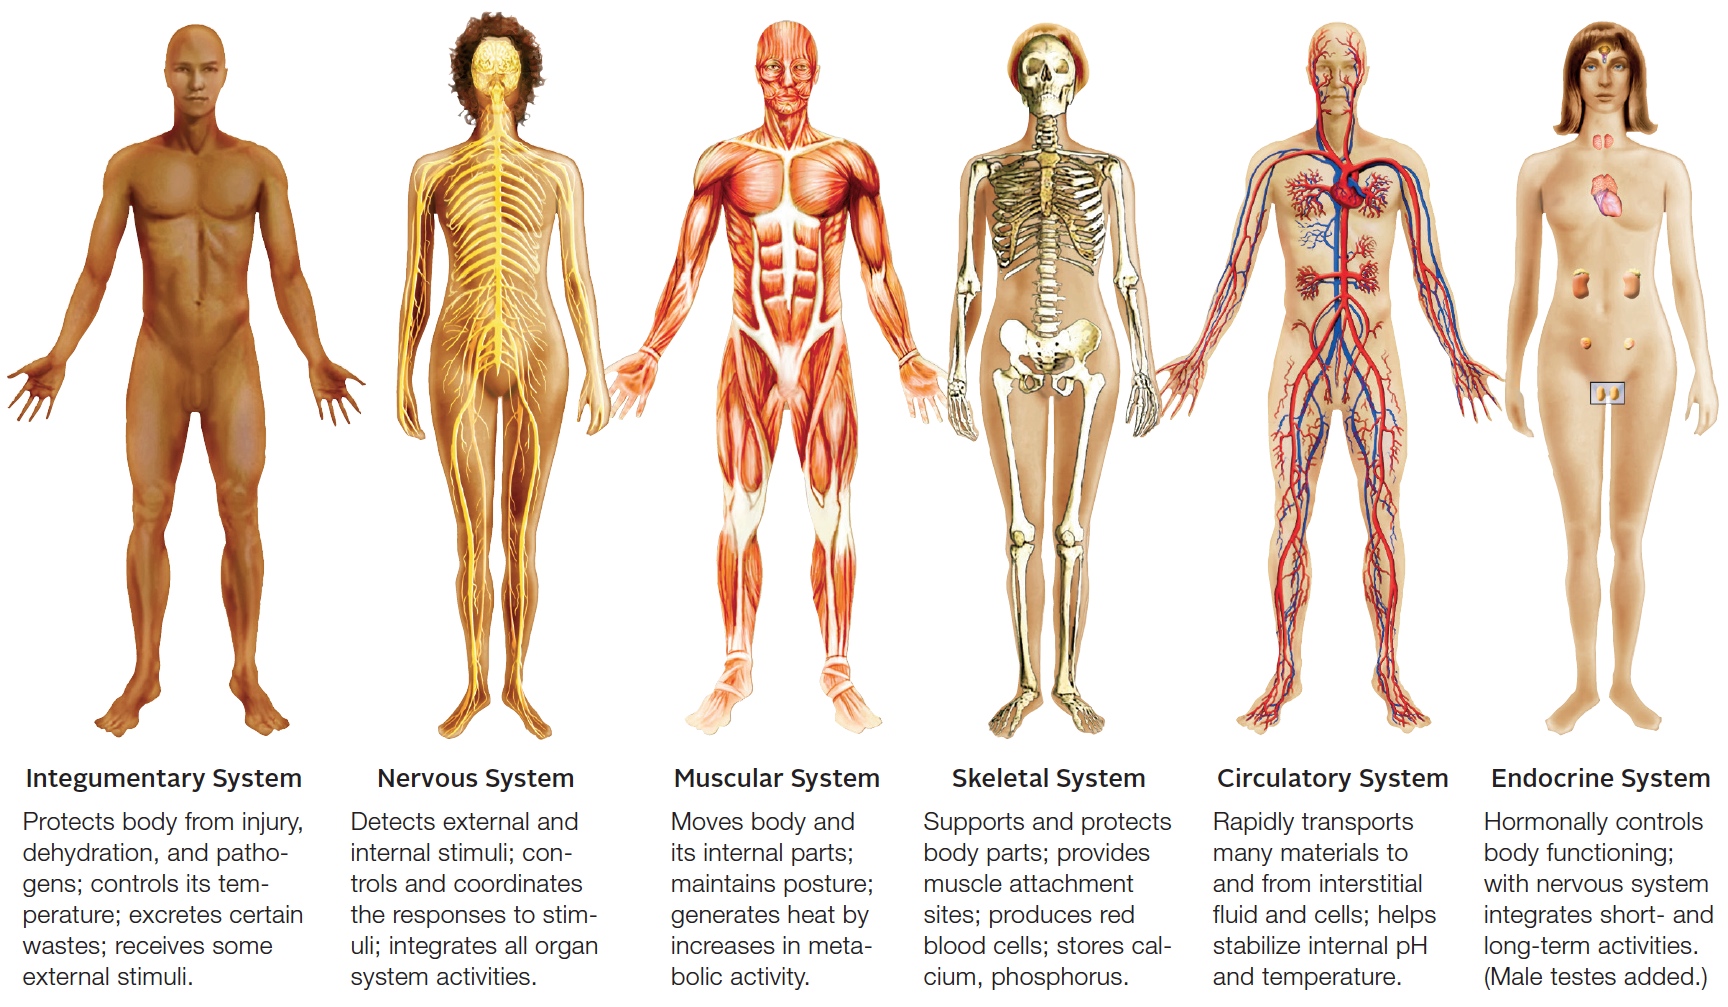 All human organ systems and their functions (Part 1)